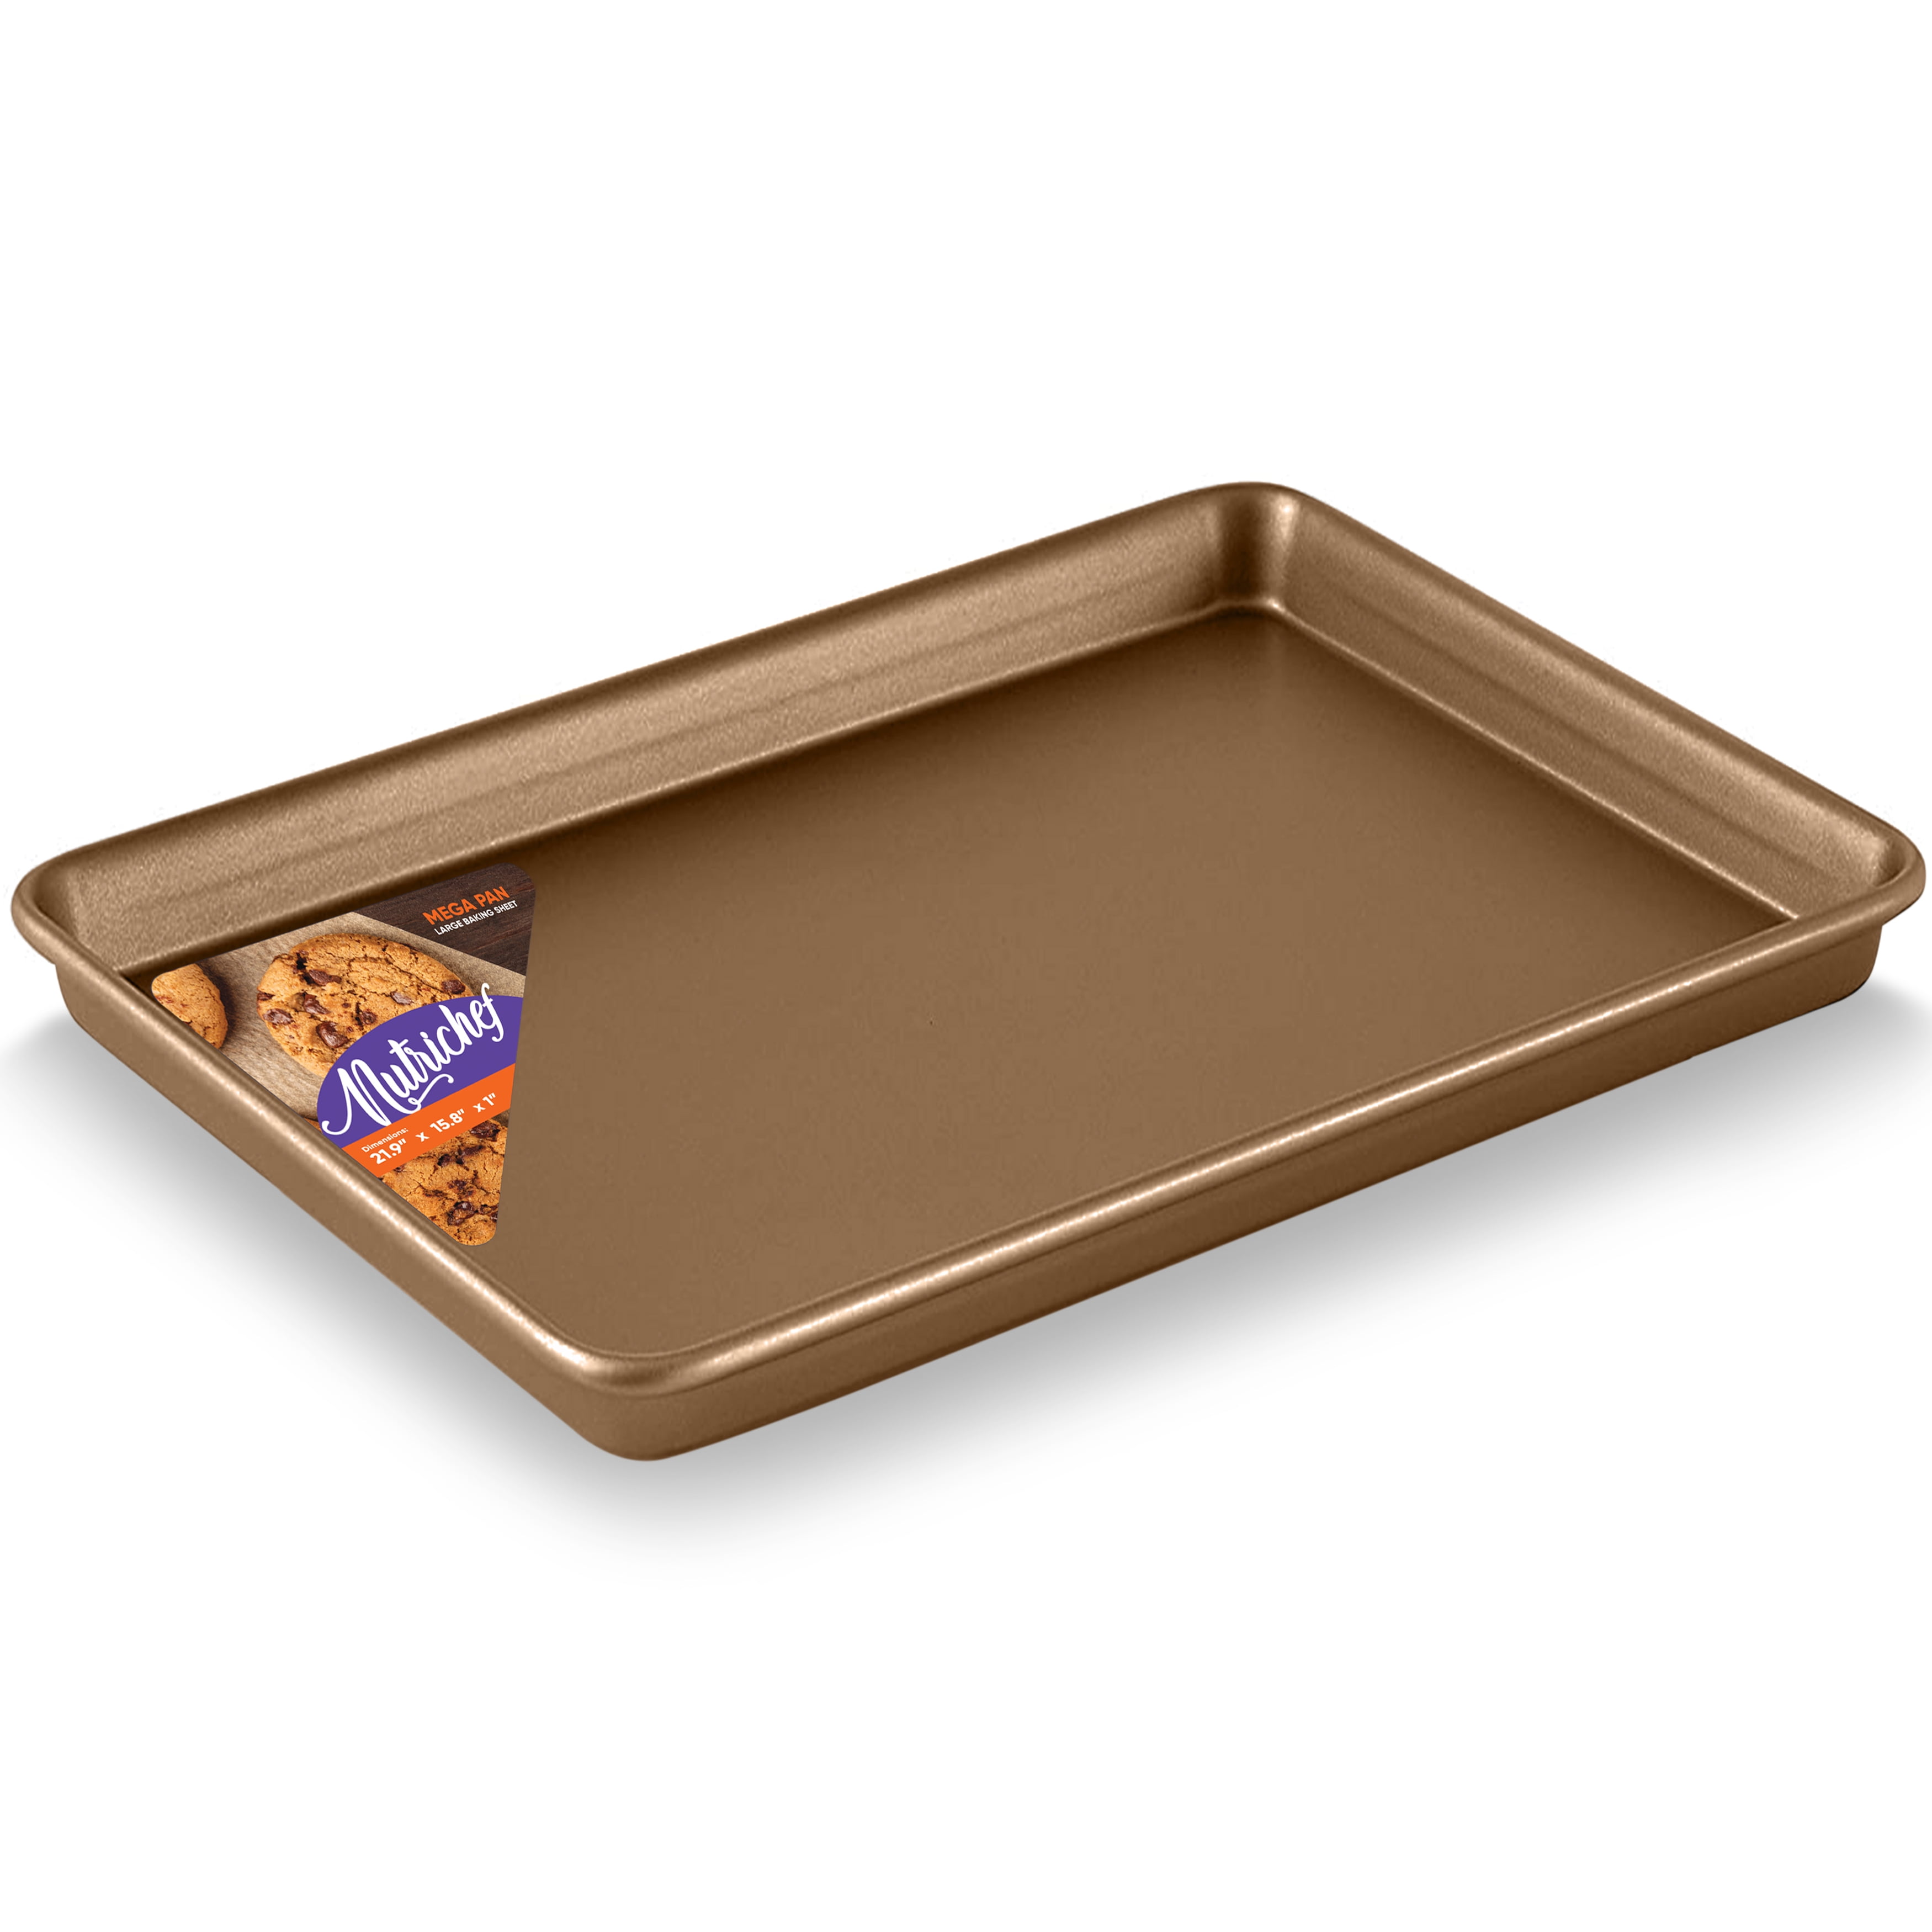 All-Clad Pro-Release Non-Stick Cookie Sheet & Reviews